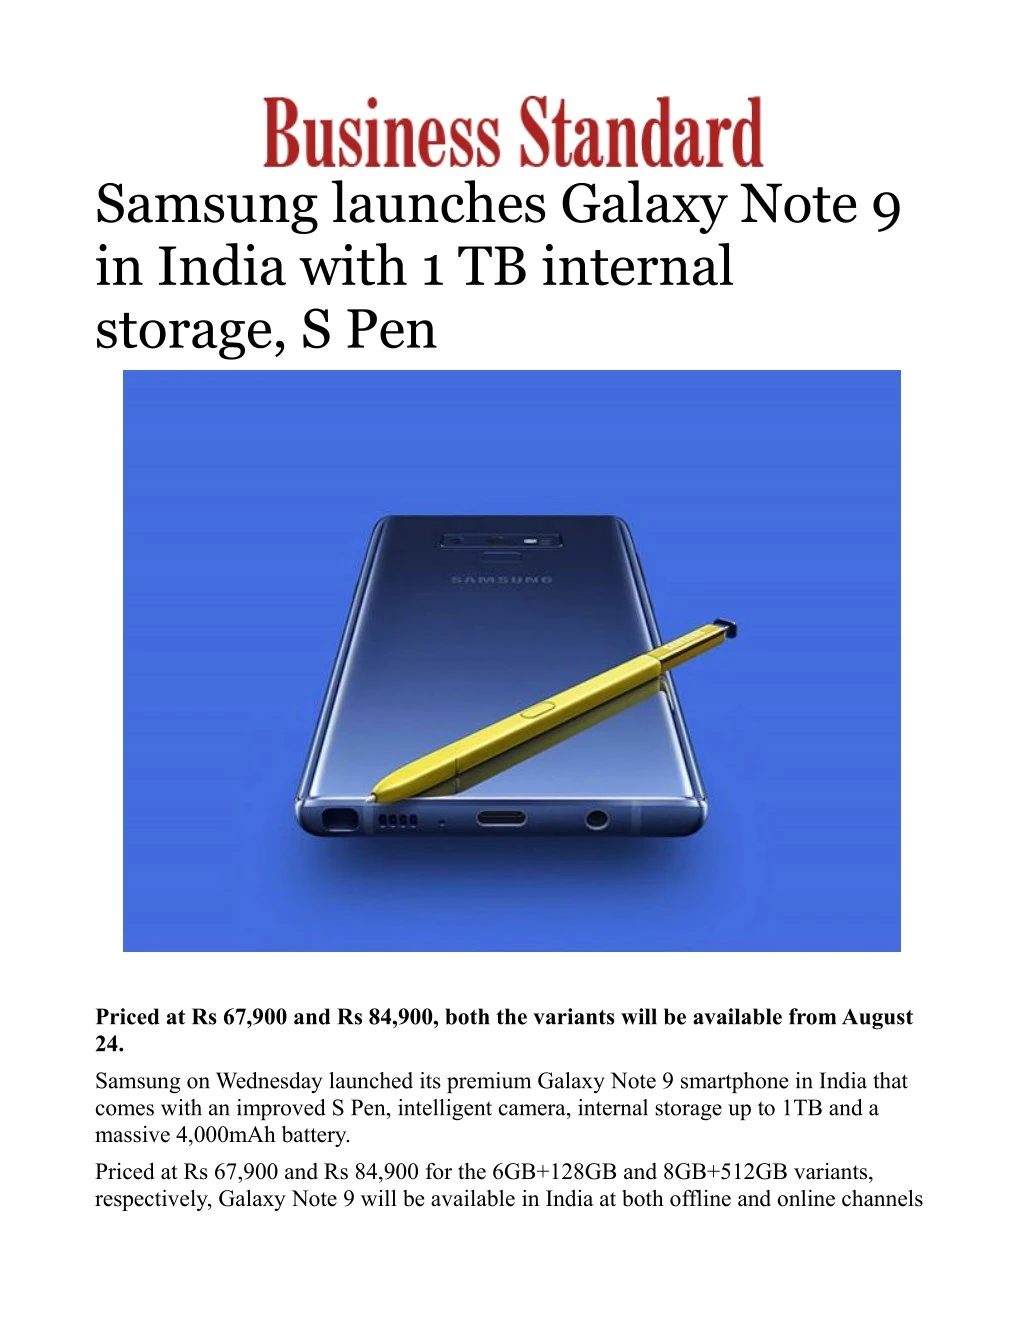 samsung launches galaxy note 9 in india with